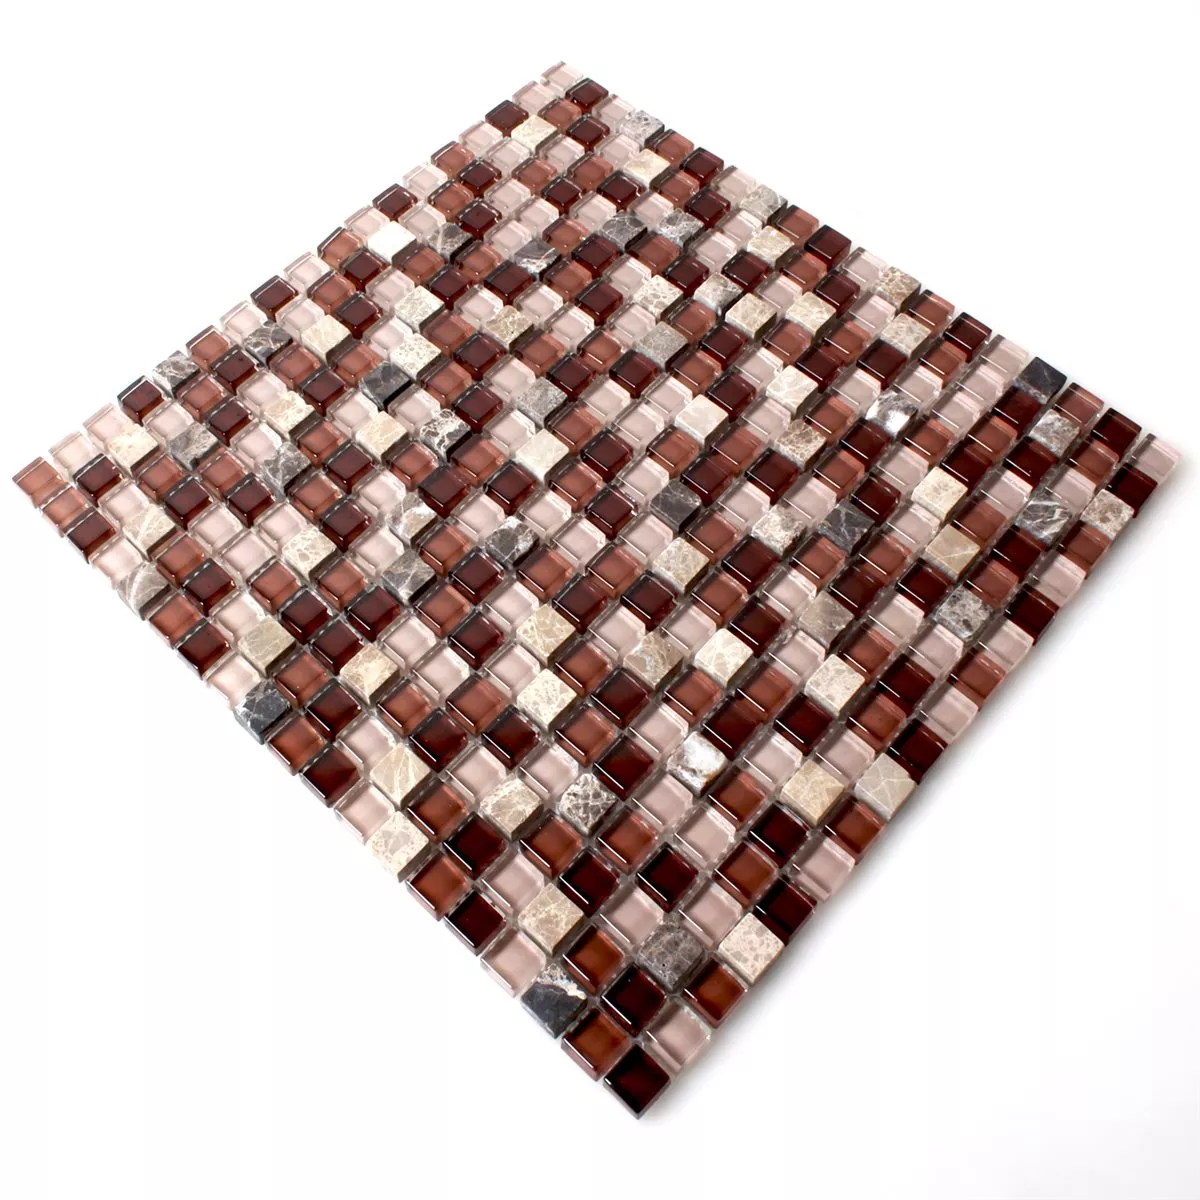 Sample Mosaic Tiles Glass Marble Brown Mix